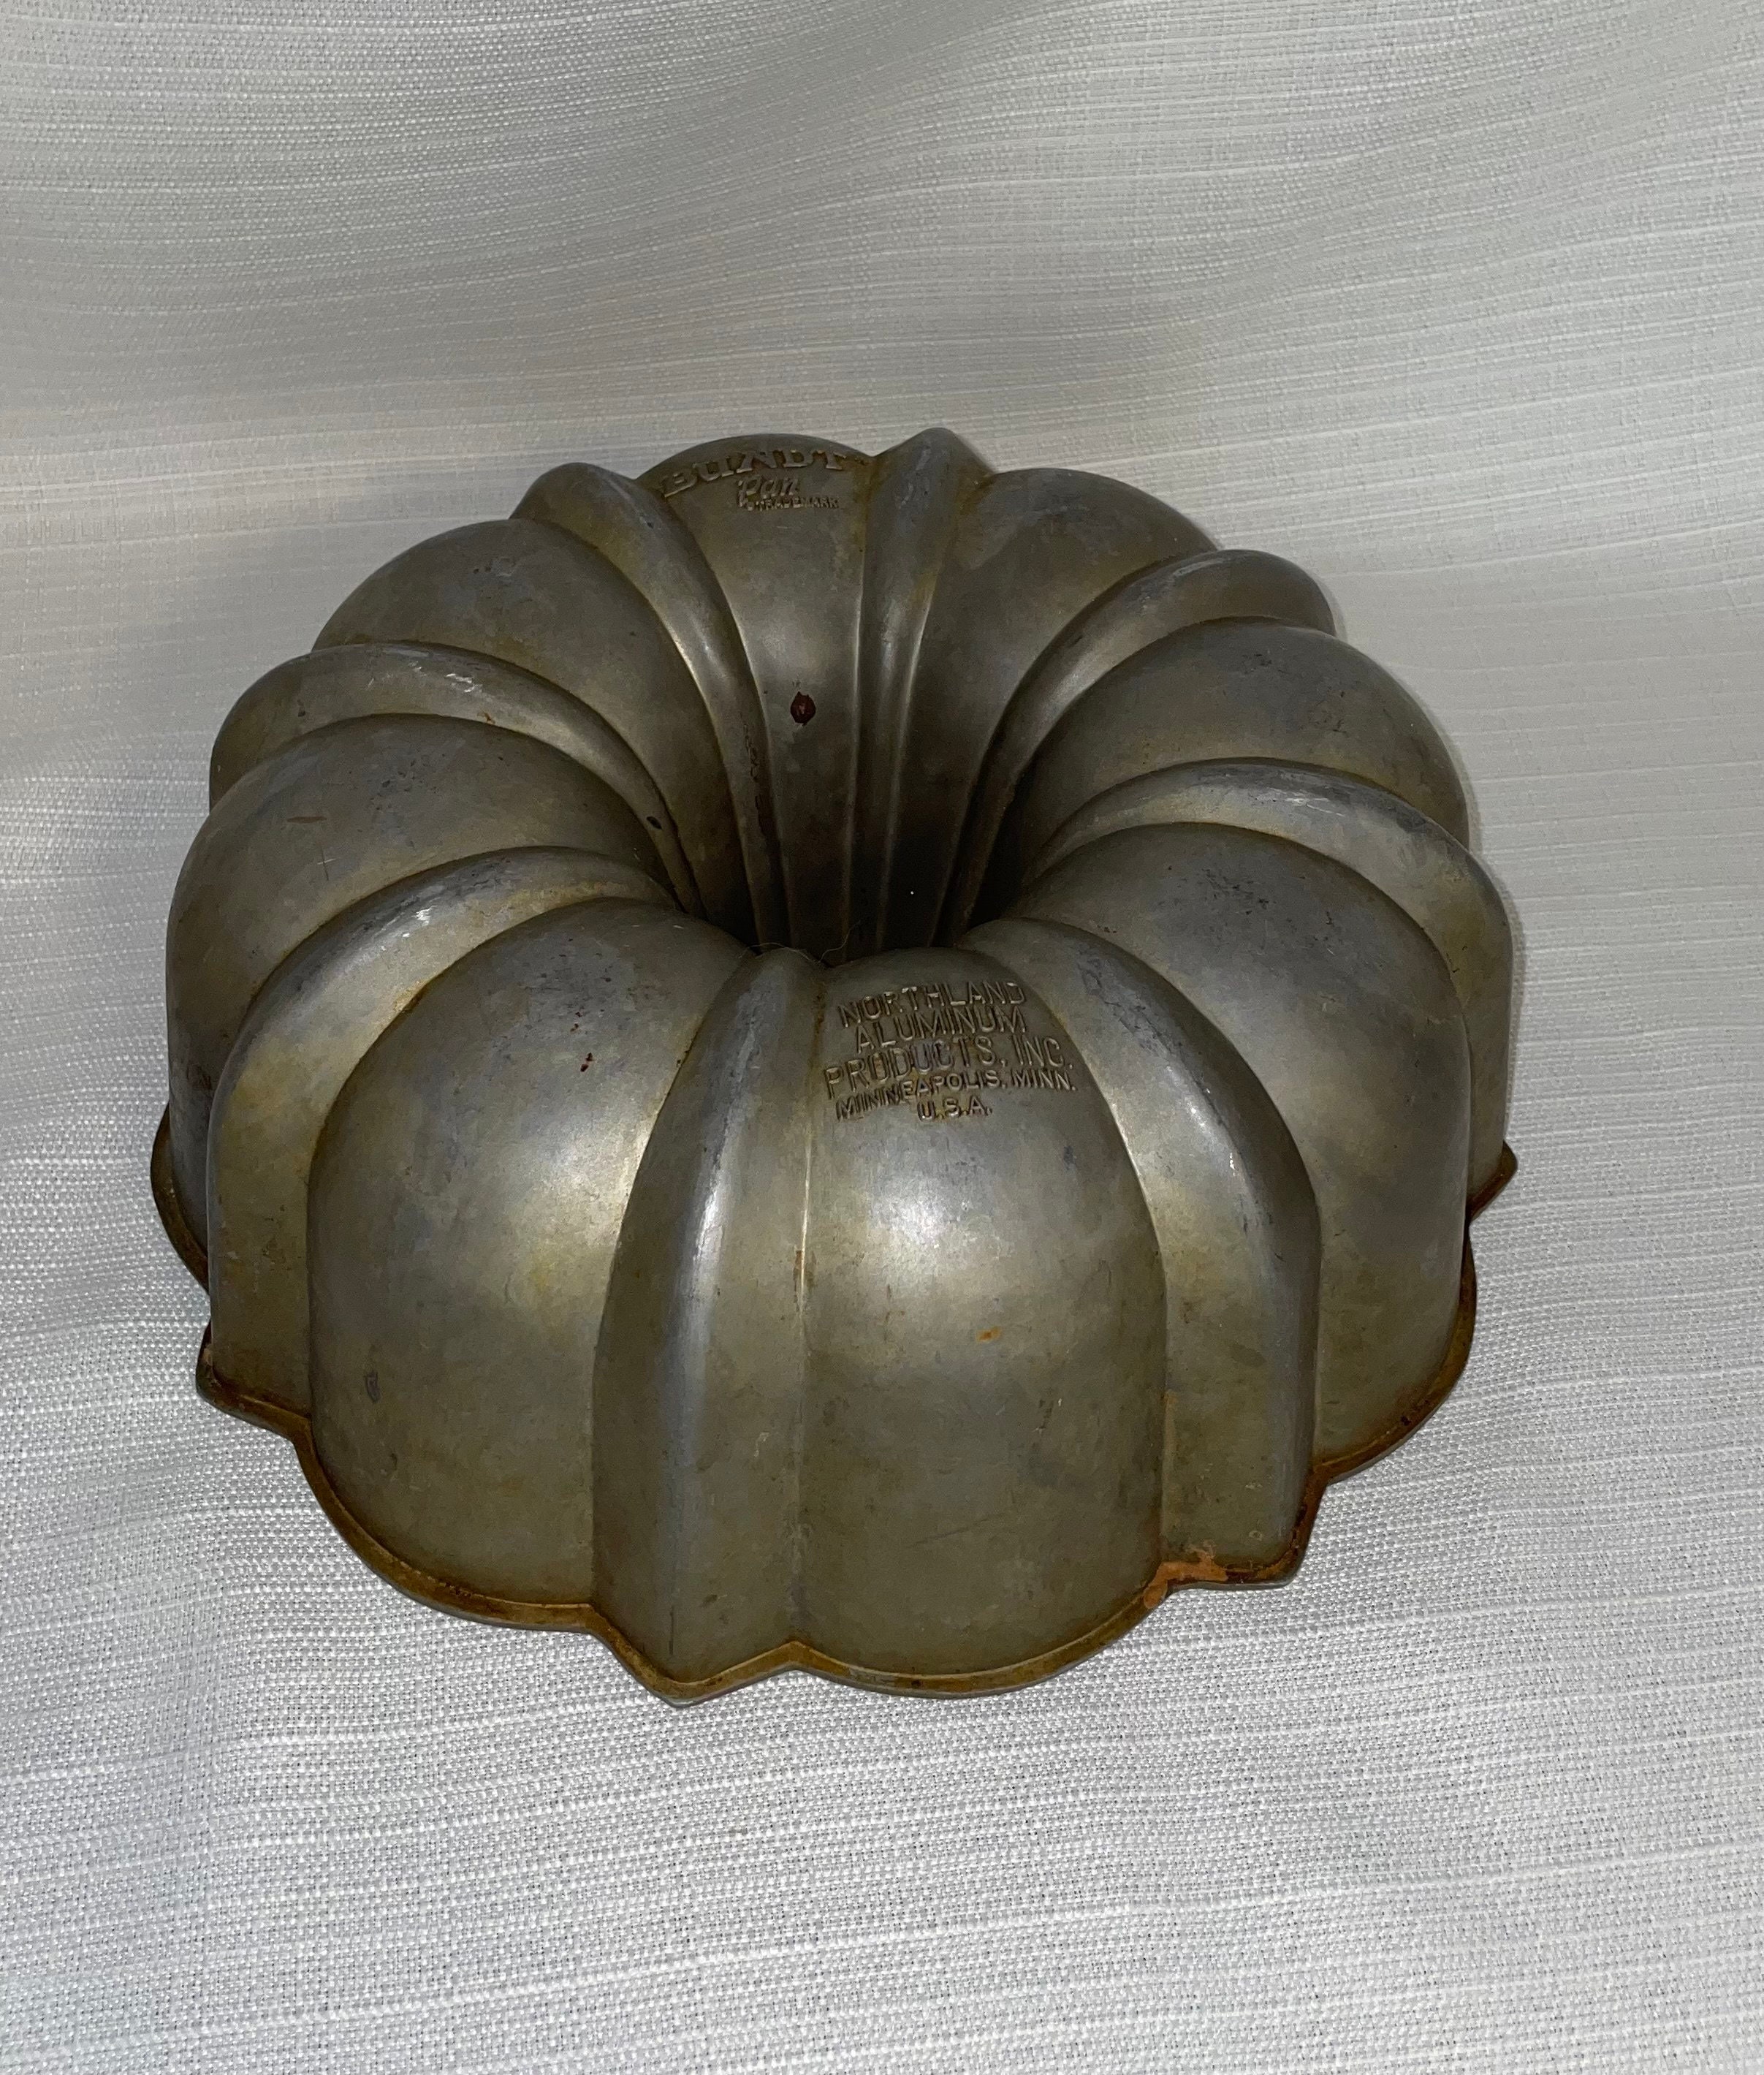 Vintage Heavy Duty Bundt Cake Pan by Northland Aluminum Products USA Cook  Baking